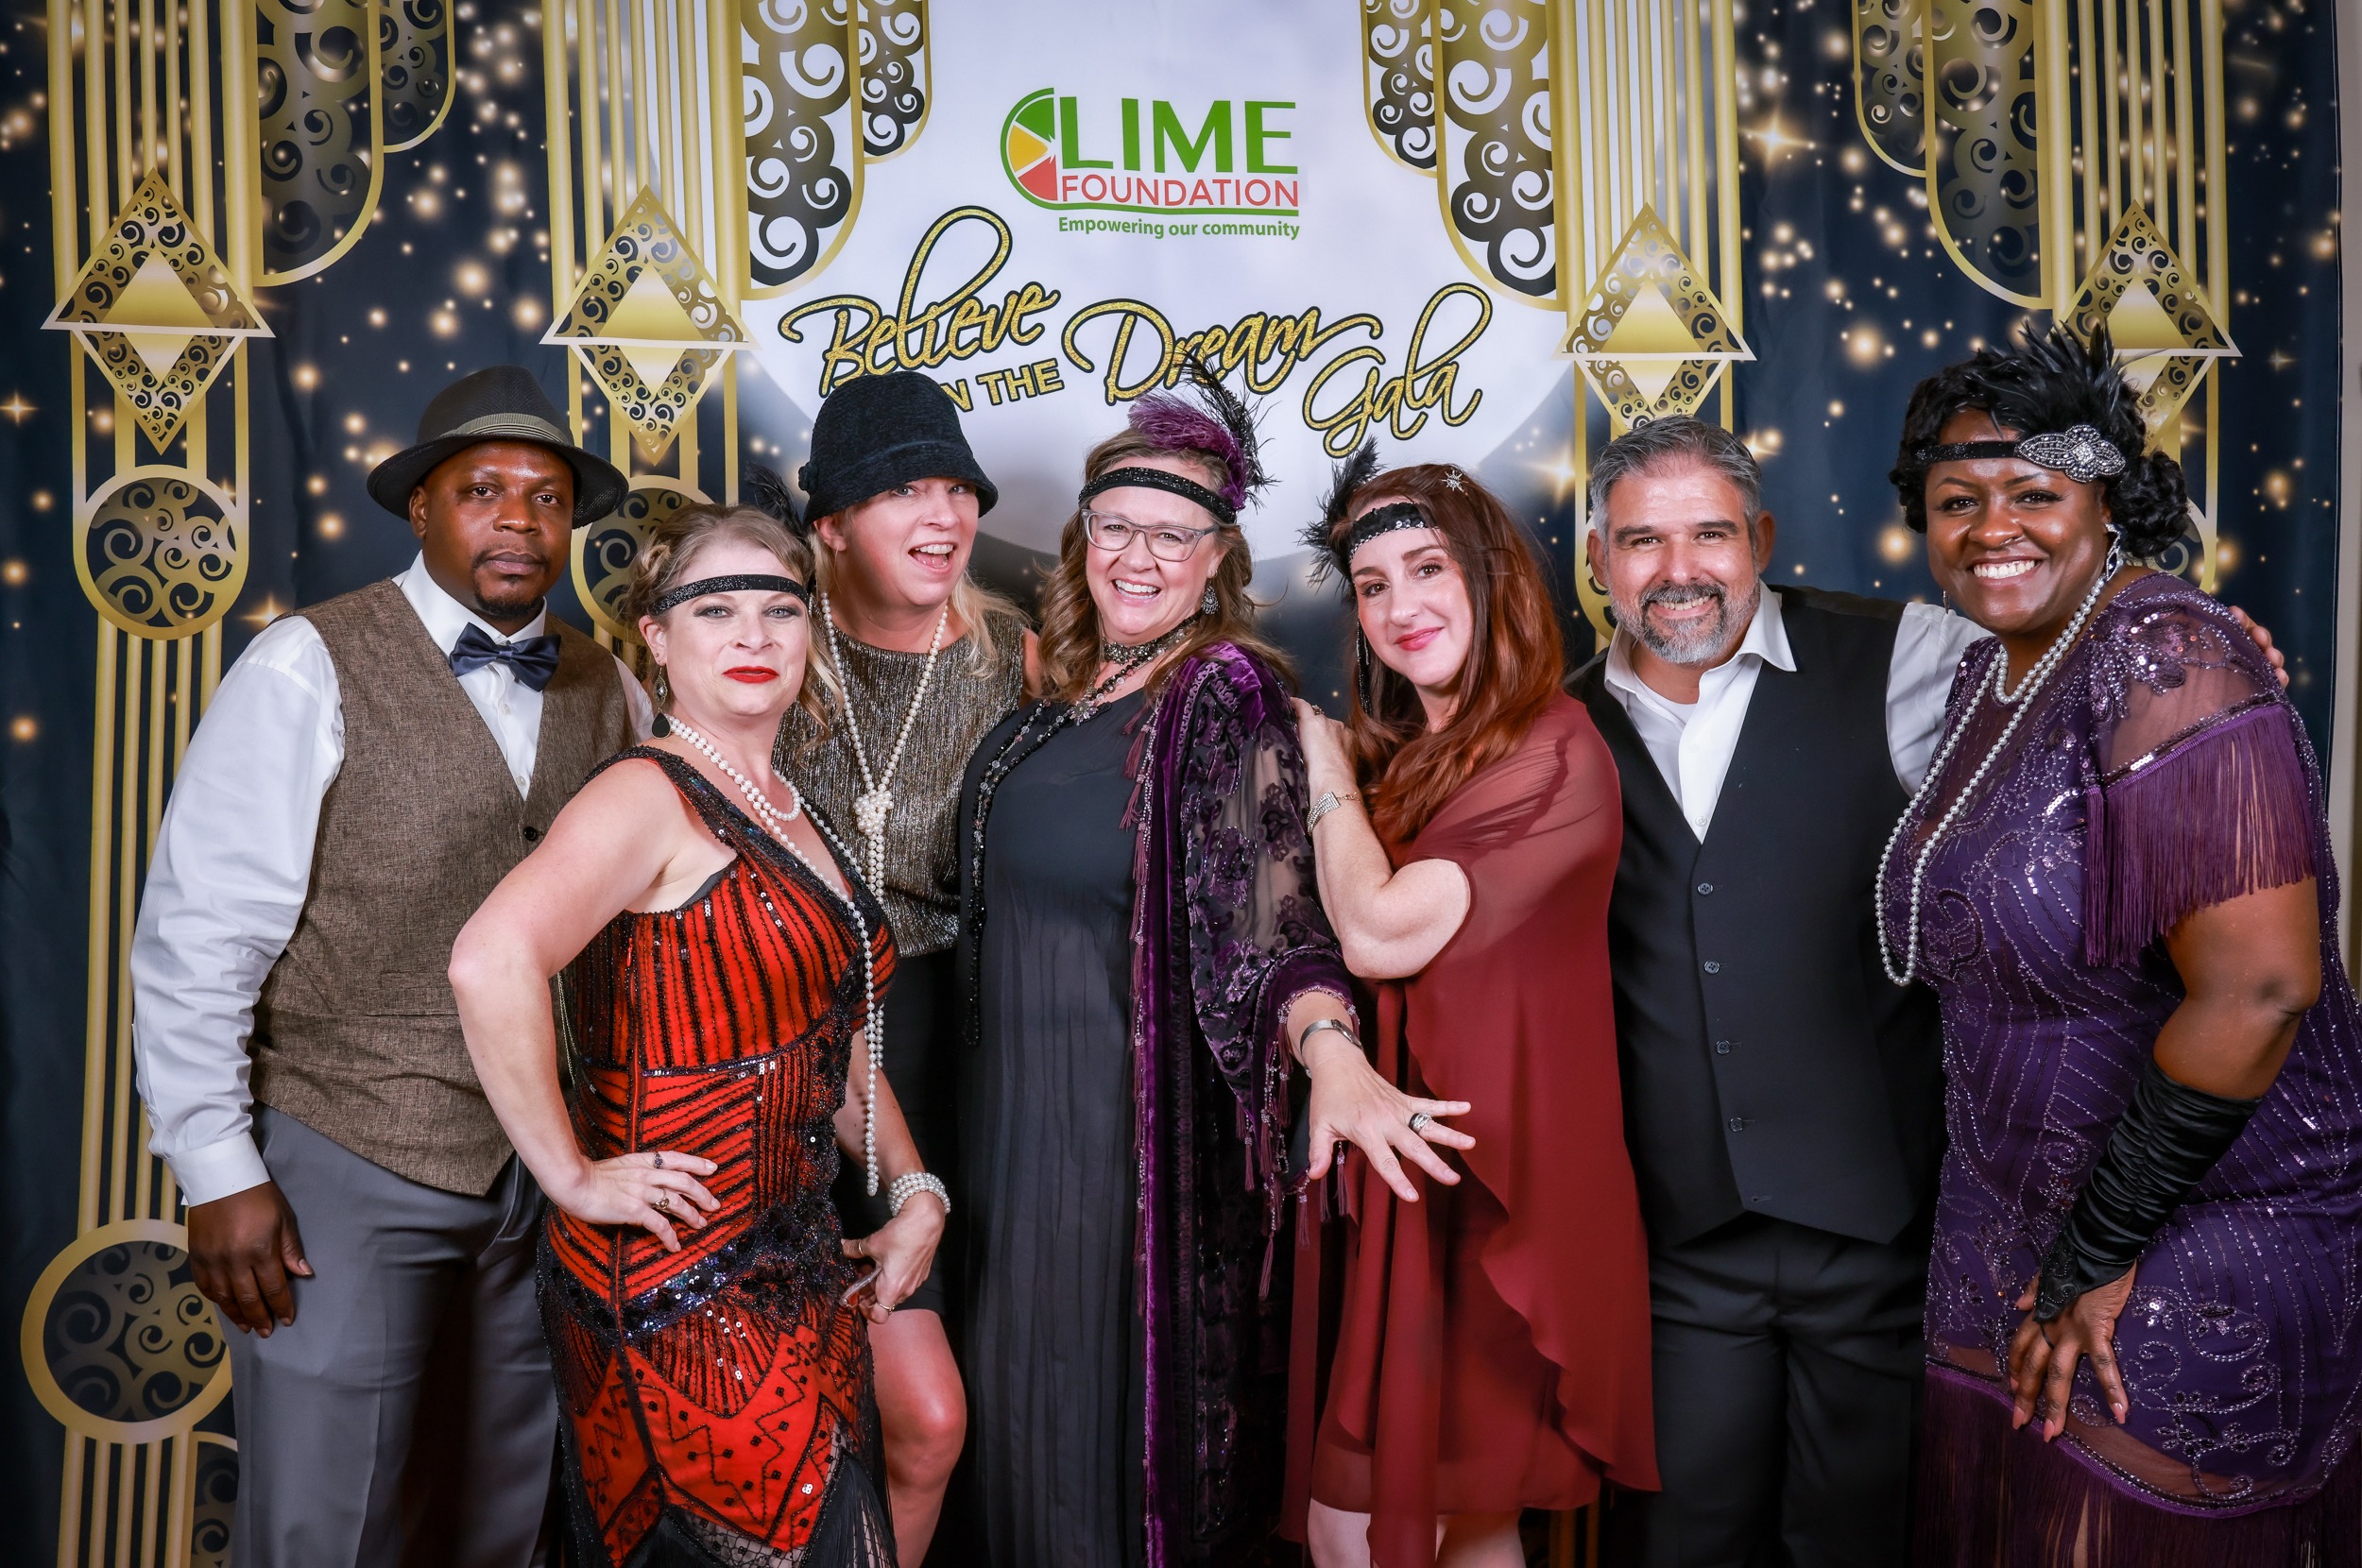 A group of people posing for a photo at a 1920s themed party hosted by The LIME Foundation of Santa Rosa.